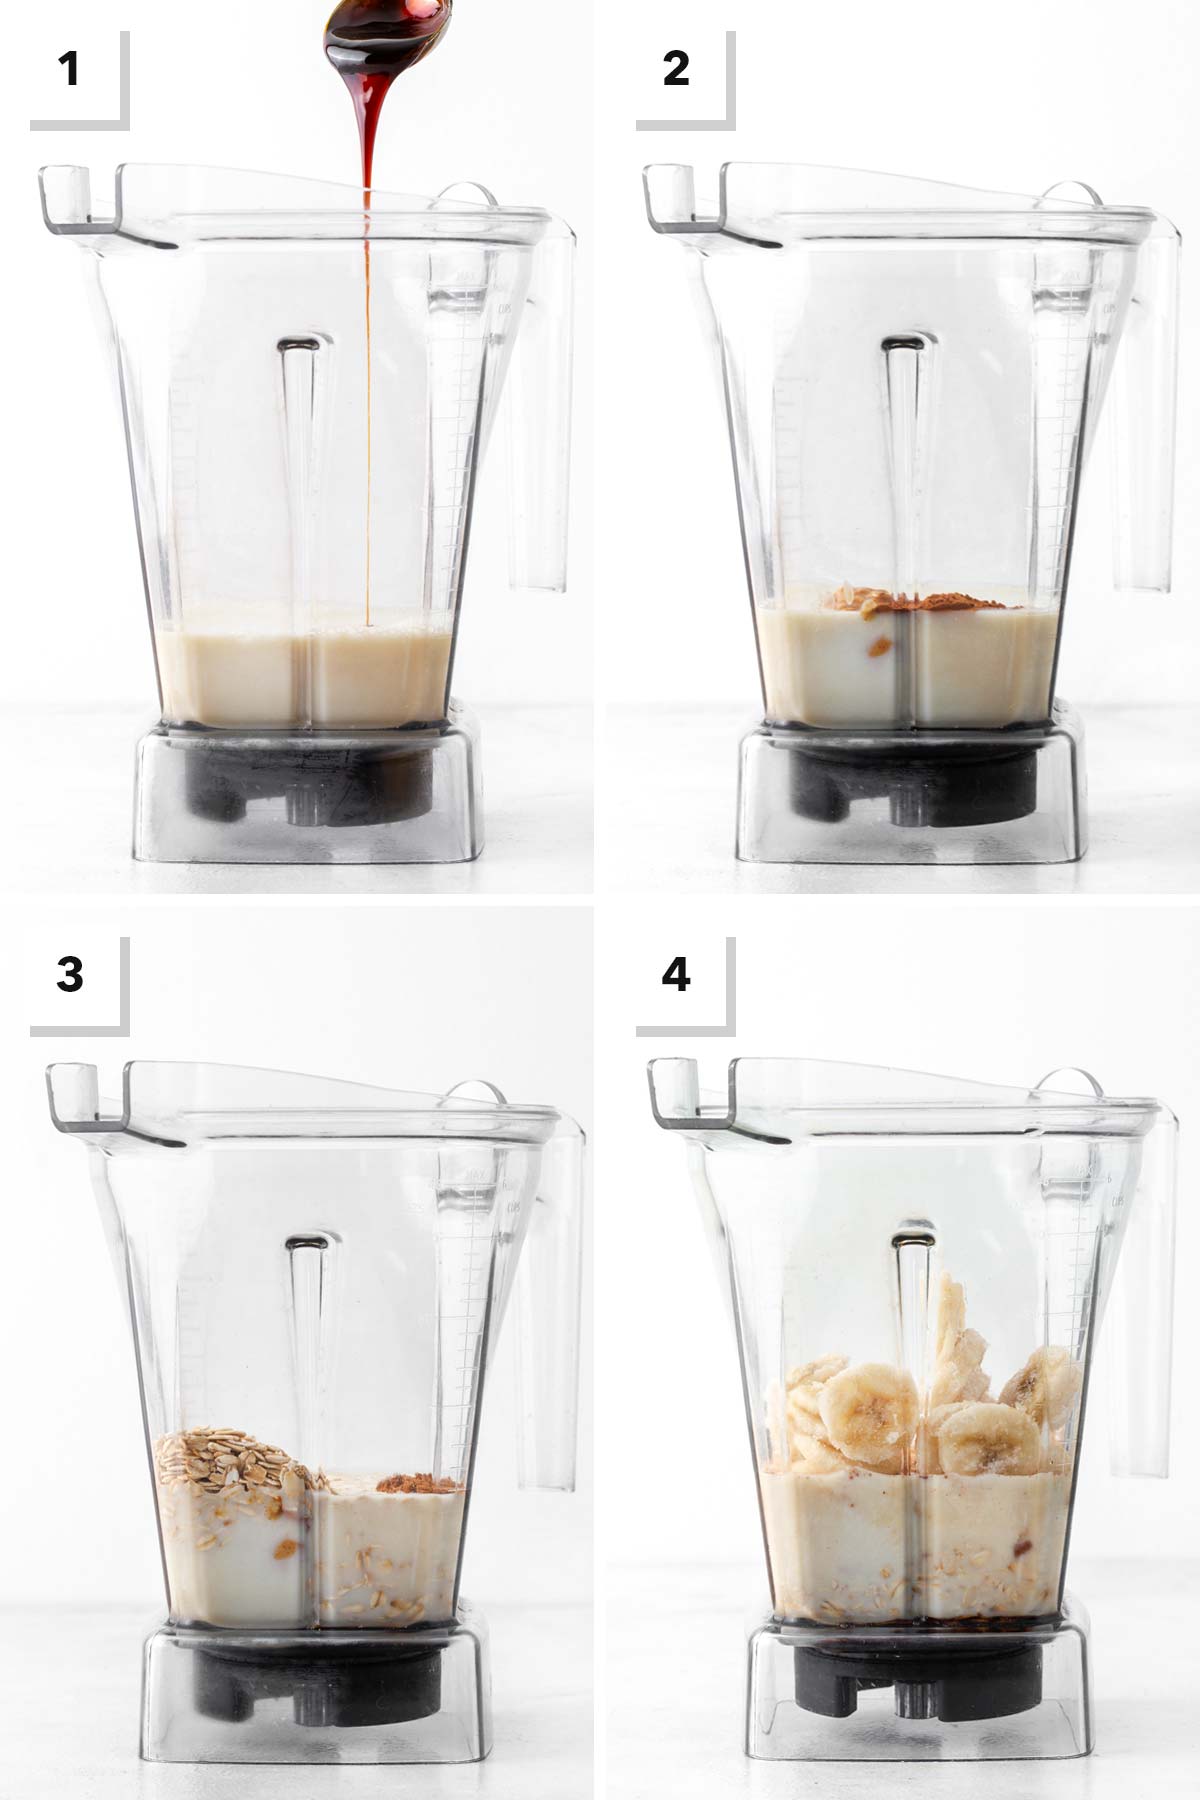 Steps for making a peanut butter oatmeal smoothie.